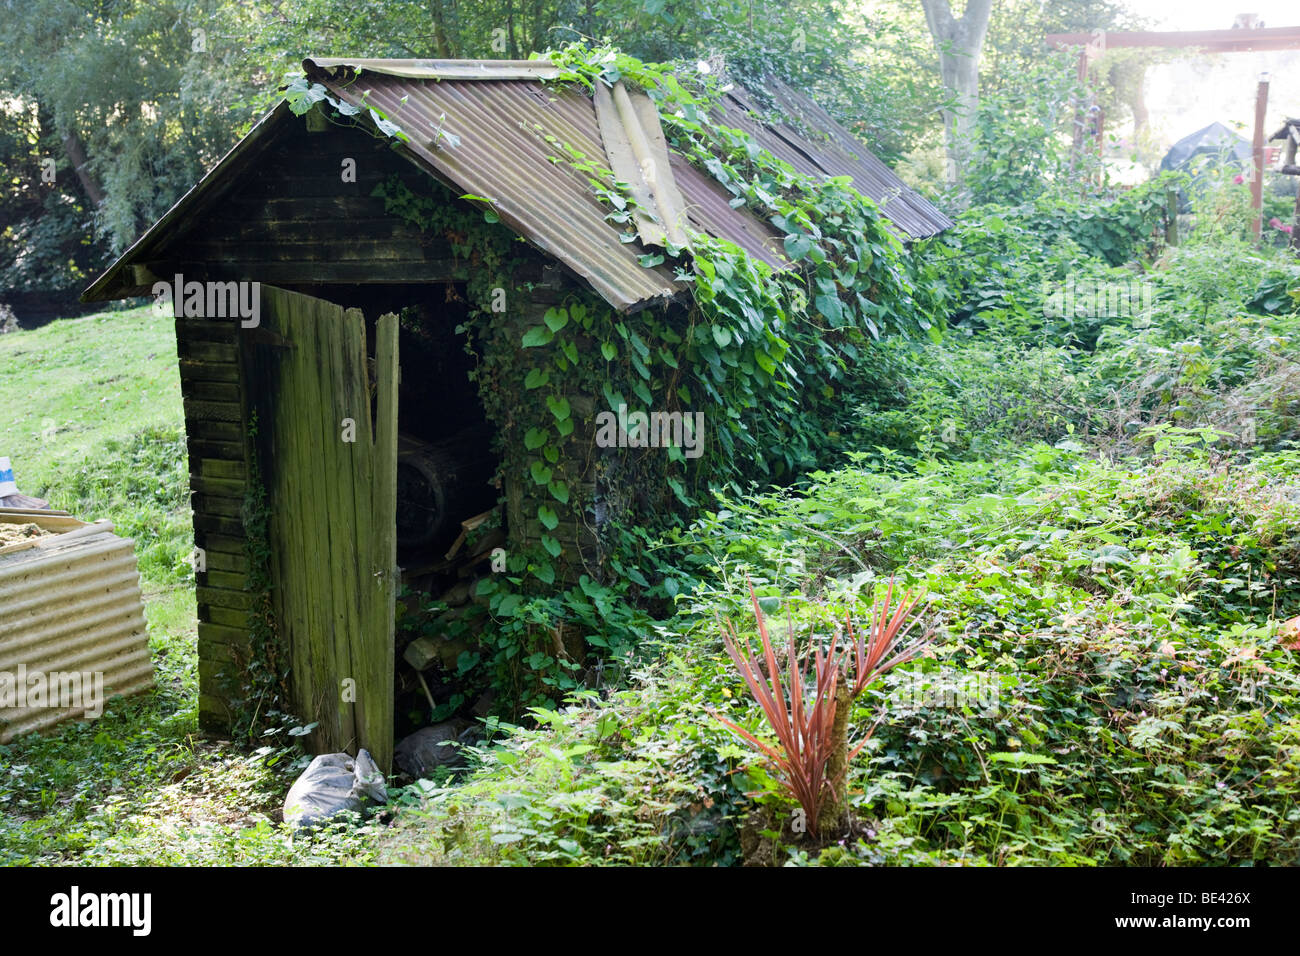 Overgrown garden shed with tin roof Stock Photo